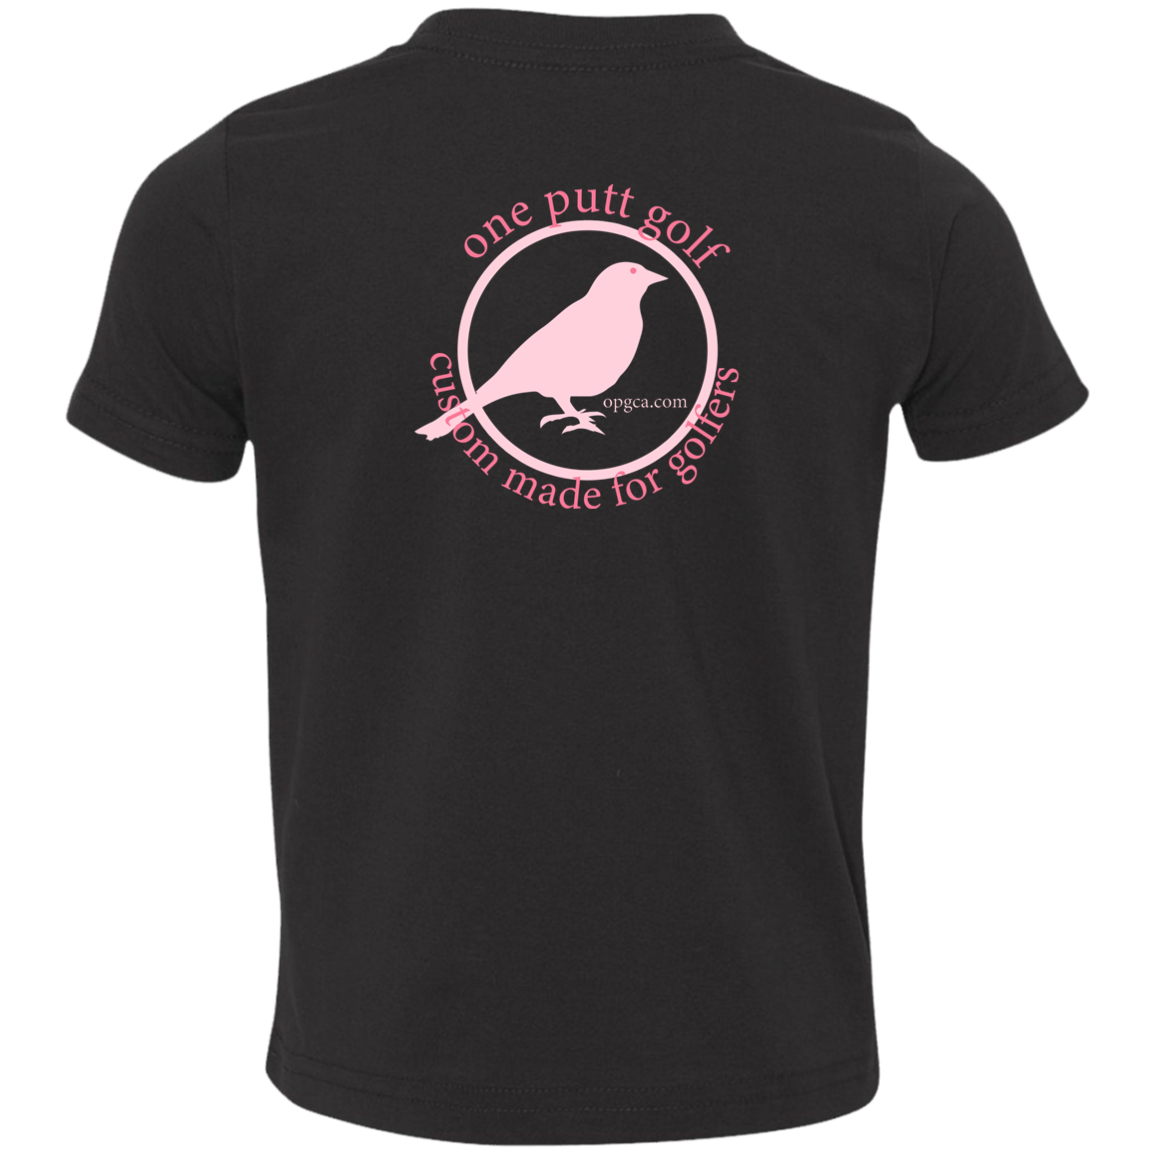 OPG Custom Design # 24. Ornithologist. A person who studies or is an expert on birds. Toddlers' Cotton T-Shirt